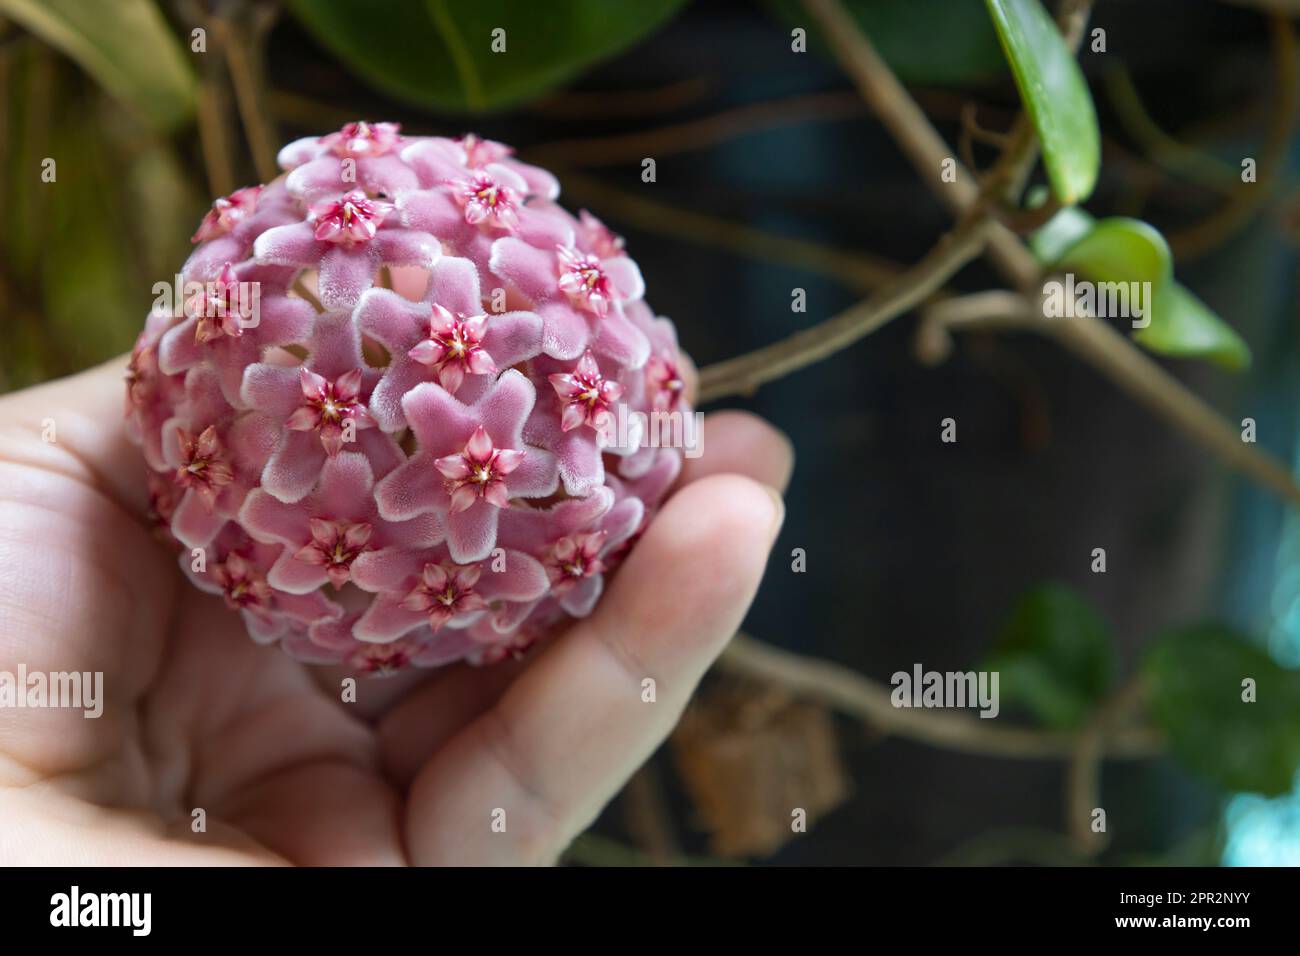 Hoya carnosa flowers. Porcelain flower or wax plant. pink blooming flowers ball on hand Stock Photo